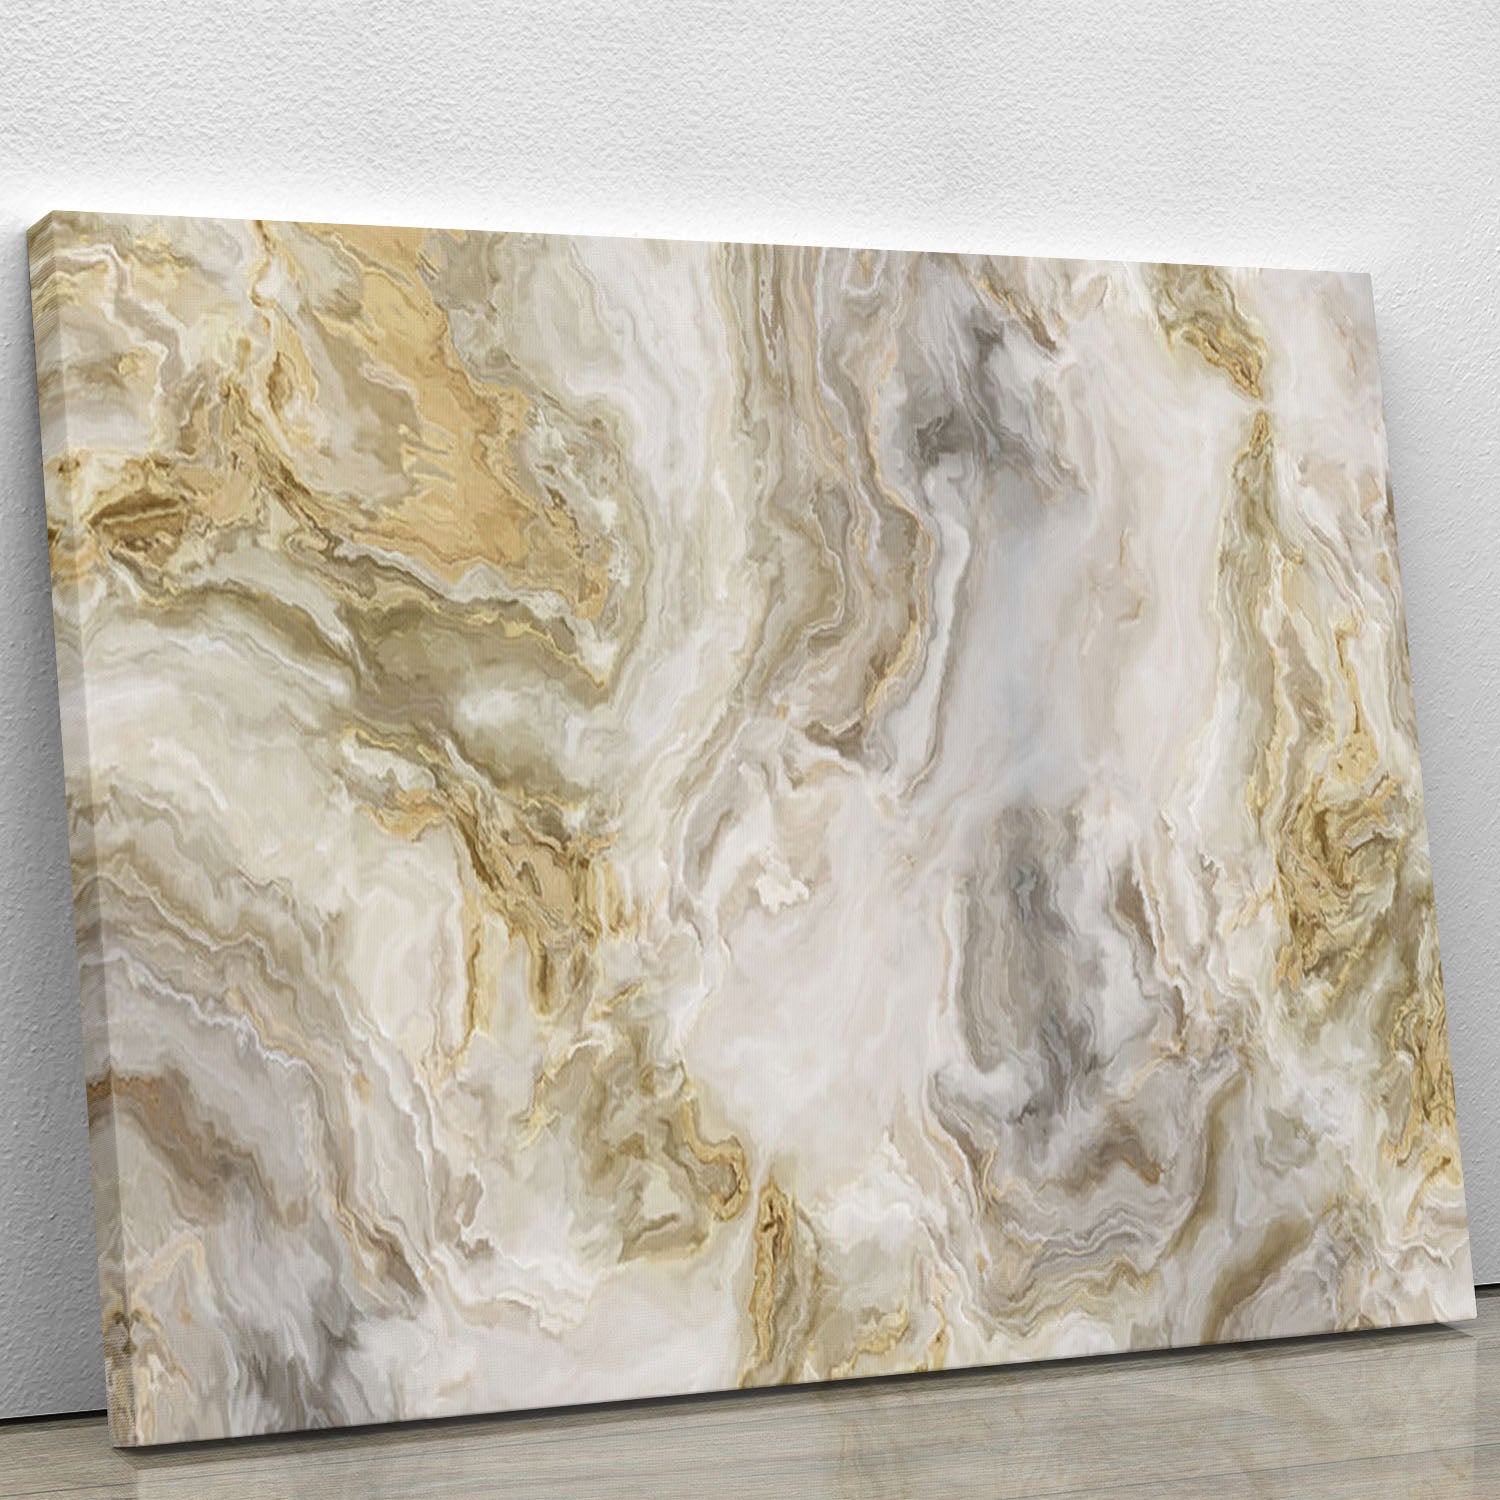 Swirled White Grey and Gold Marble Canvas Print or Poster - Canvas Art Rocks - 1